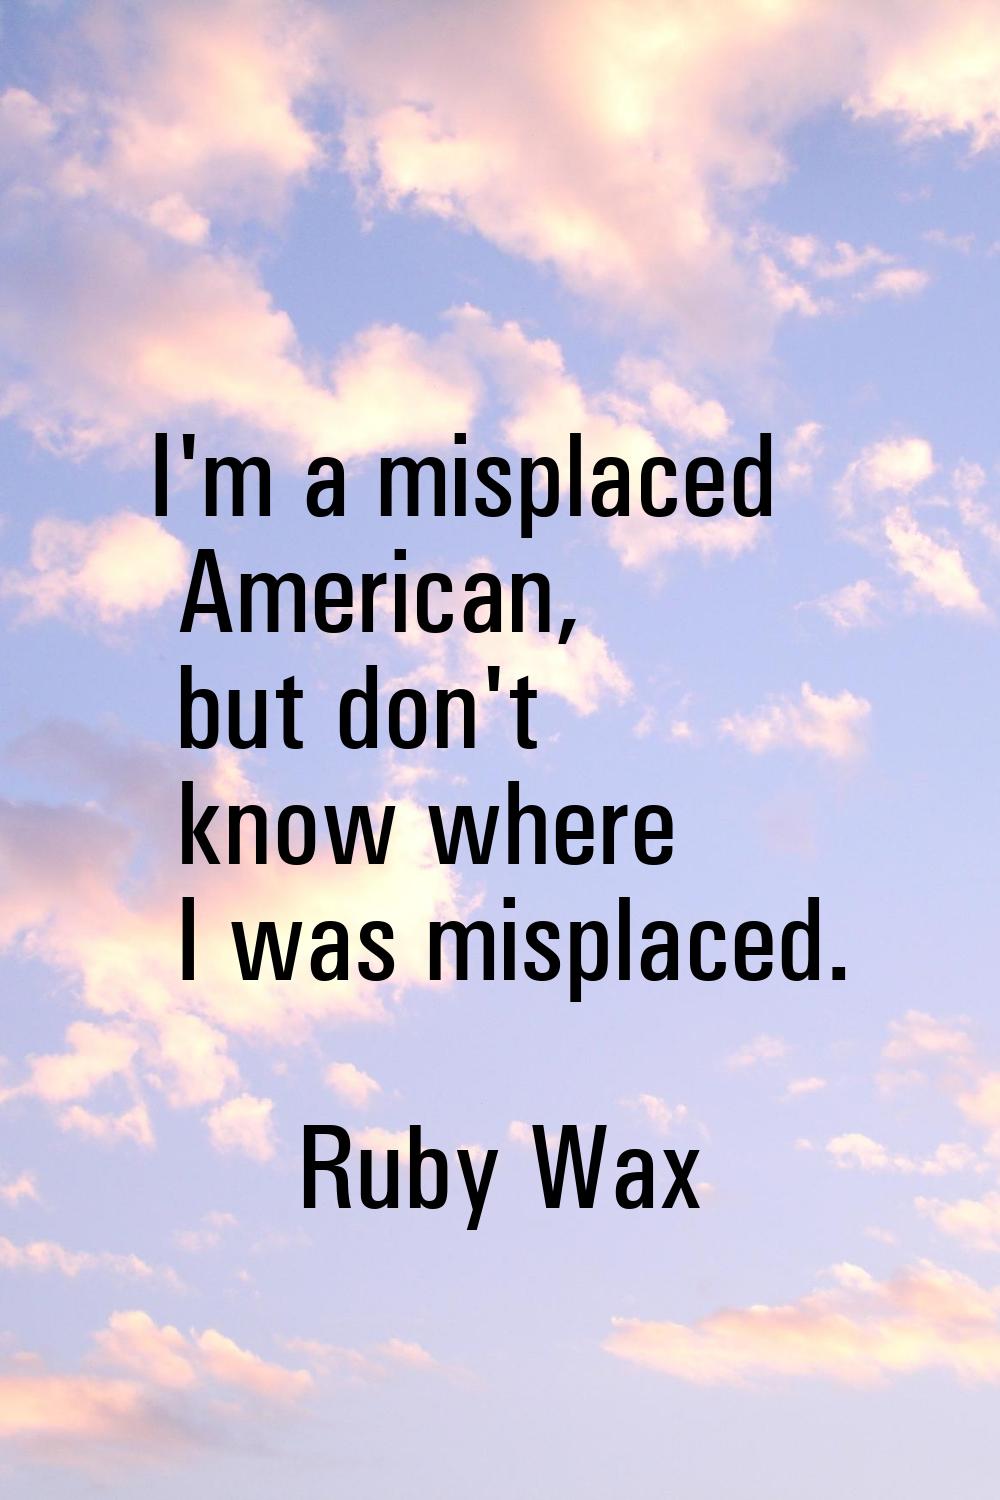 I'm a misplaced American, but don't know where I was misplaced.